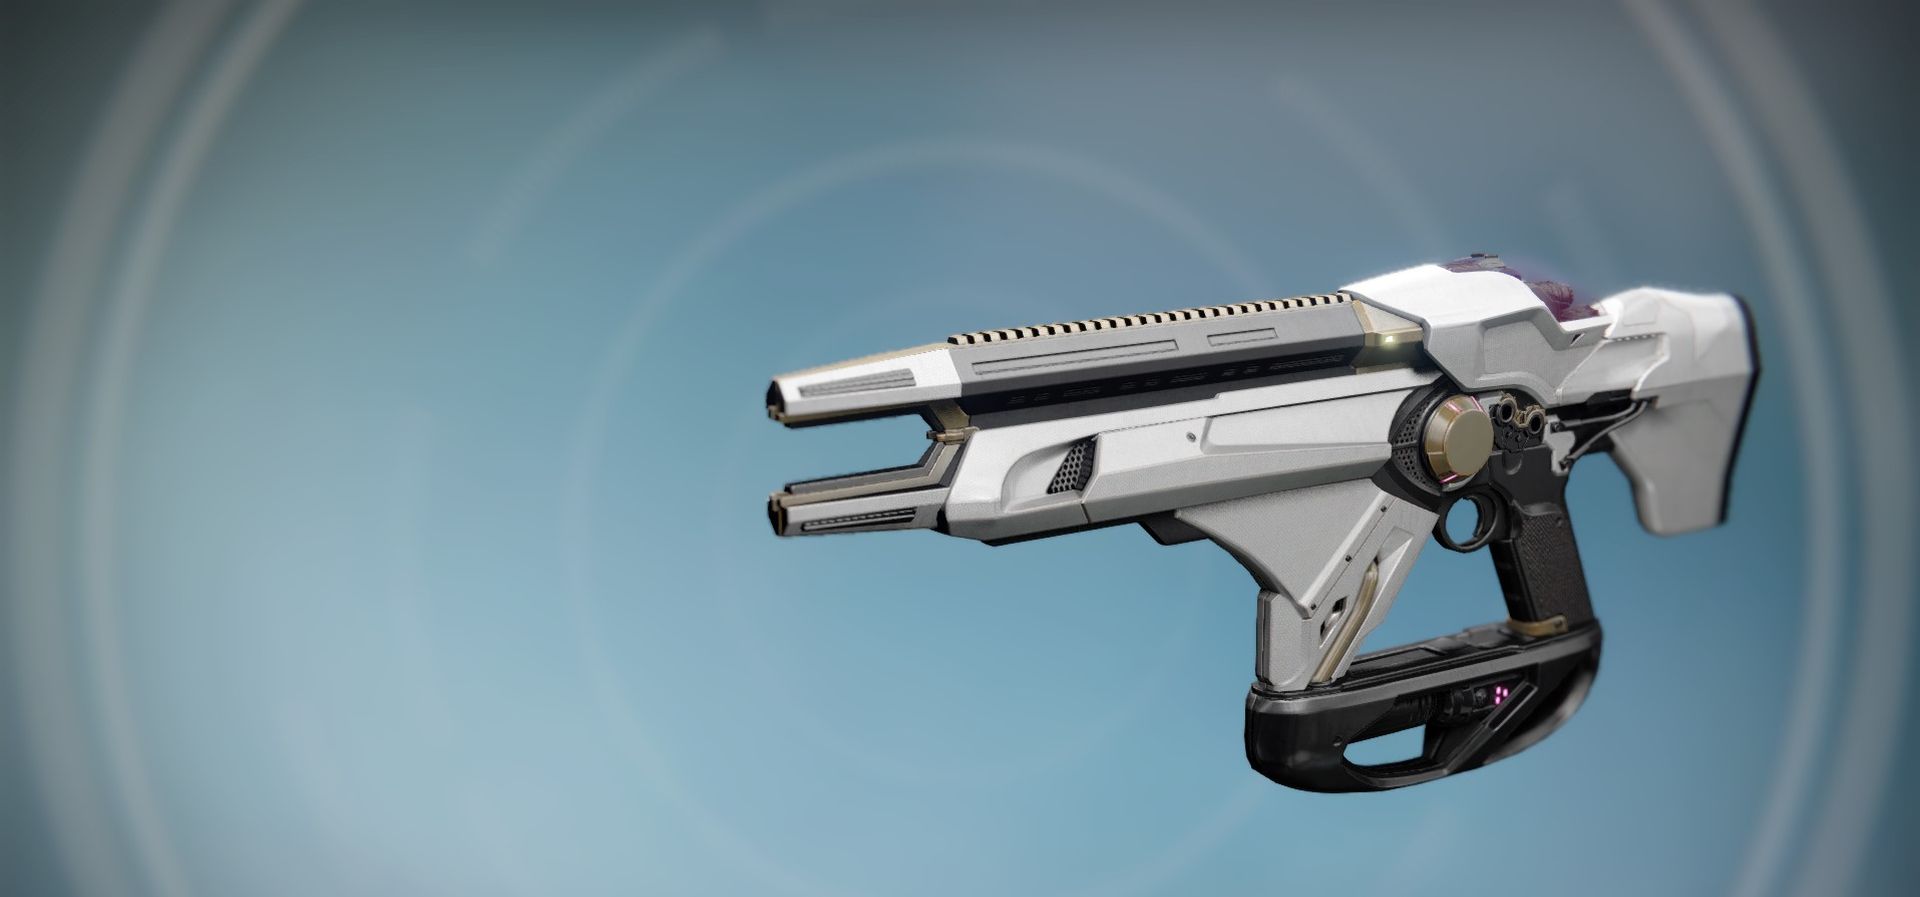 Today, we are going to be going over all we know about the Destiny 2 Telesto event and how to get Telesto Catalyst, so you can enjoy all there is about these...